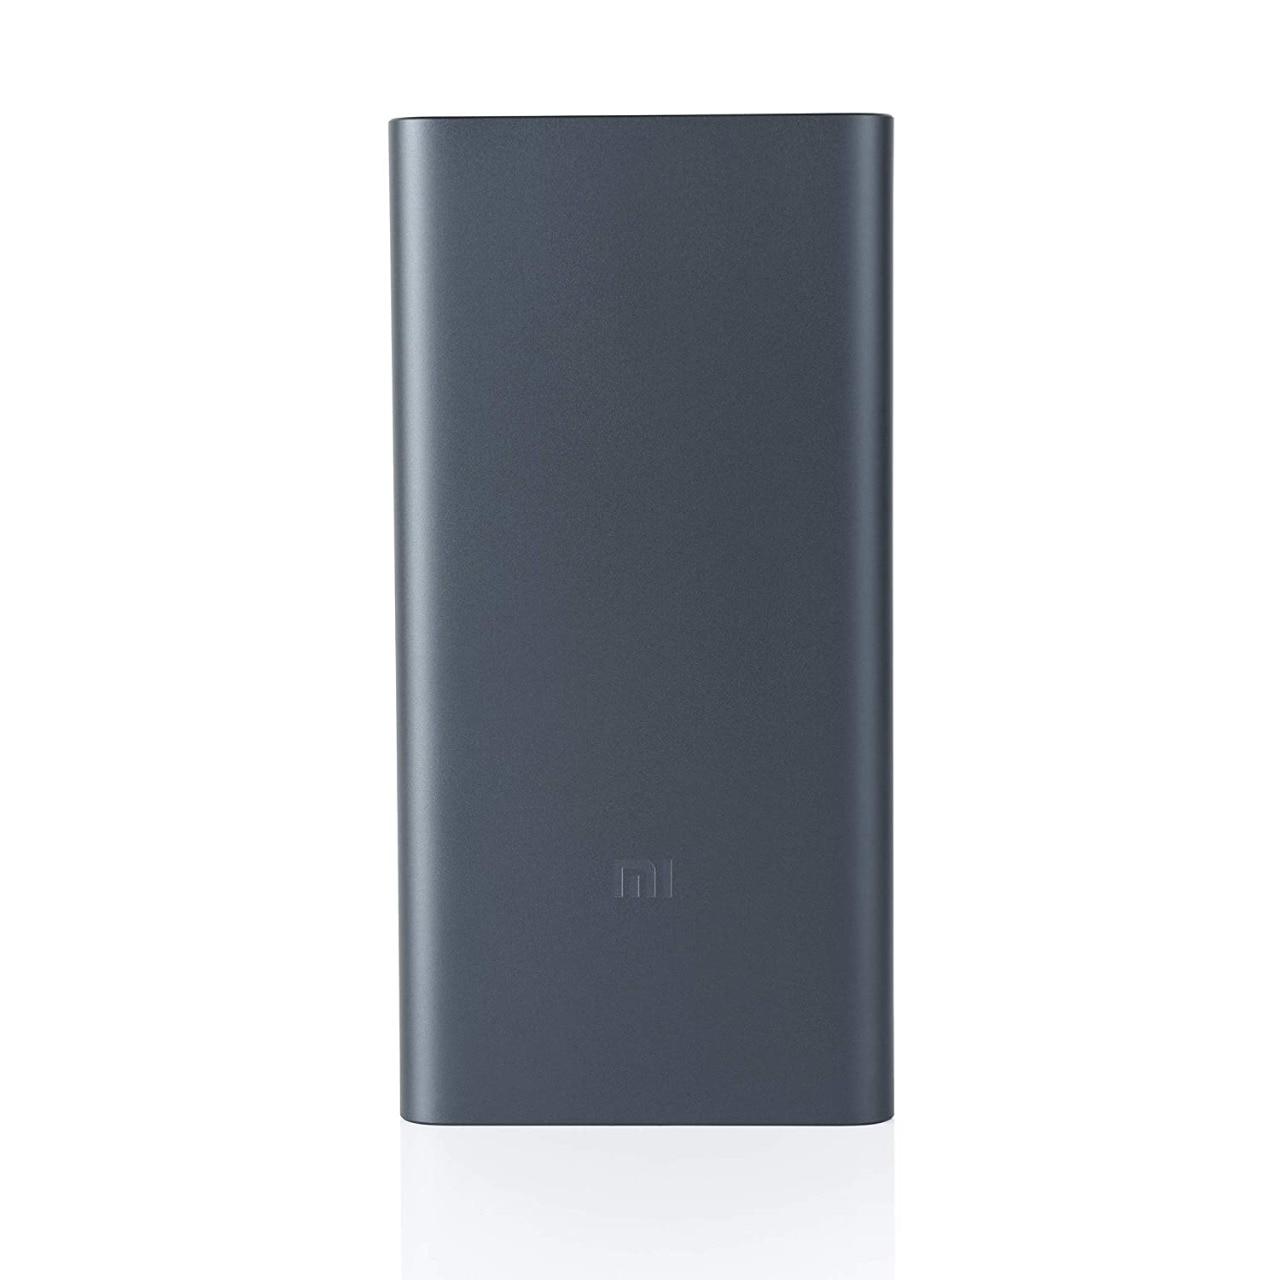 Amazon Sale: Offer on the most important power bank for charging mobile and other accessories, buy best power bank under Rs.